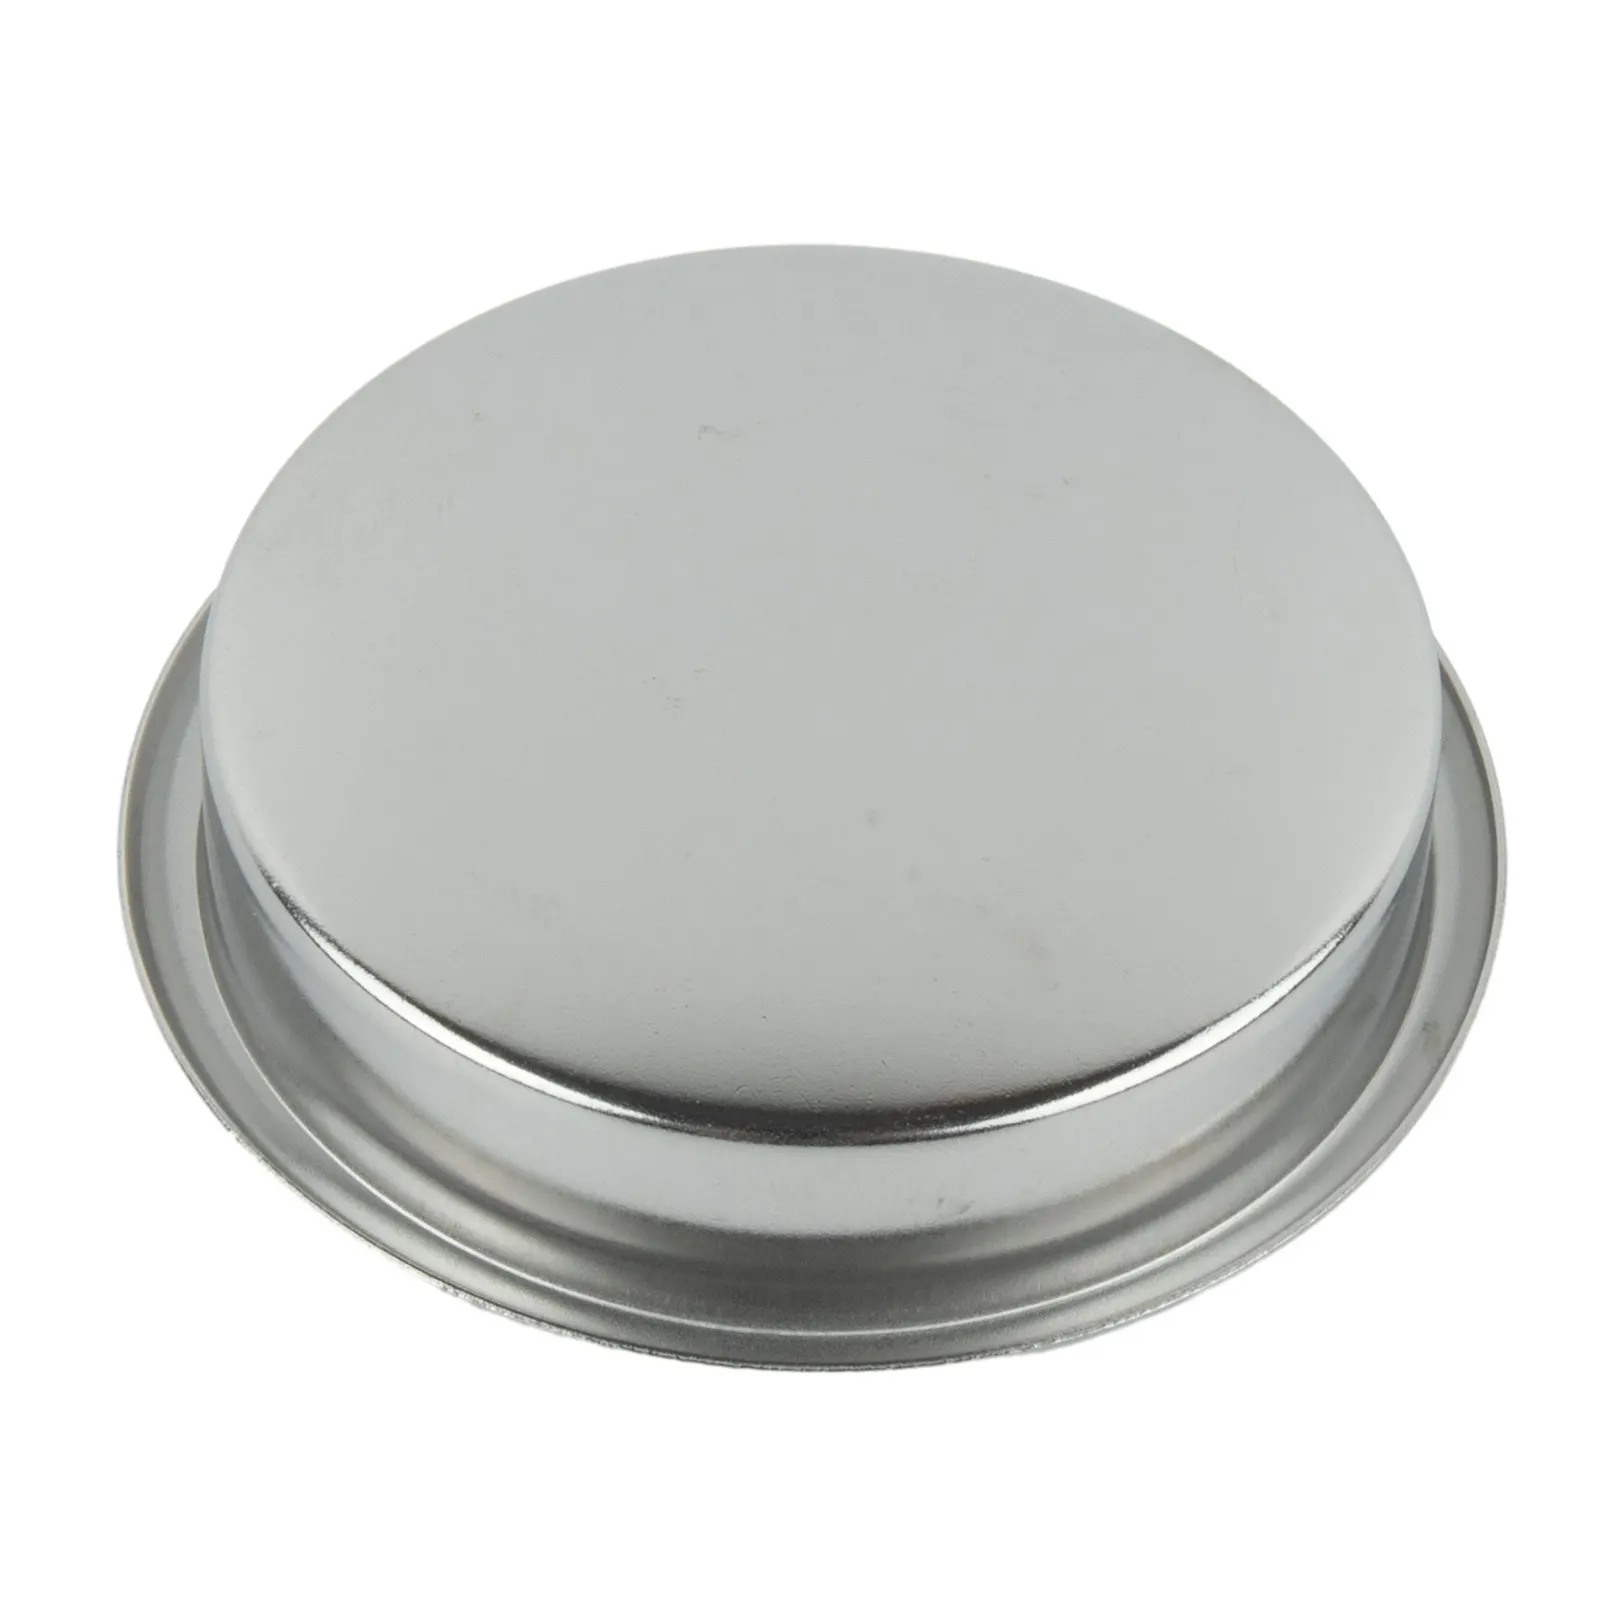 

Kitchen Tool Filter Bowl Accessories Gadgets Stainless Steel 1pc Dia 58mm Height 17mm Parts High-Quality Materials